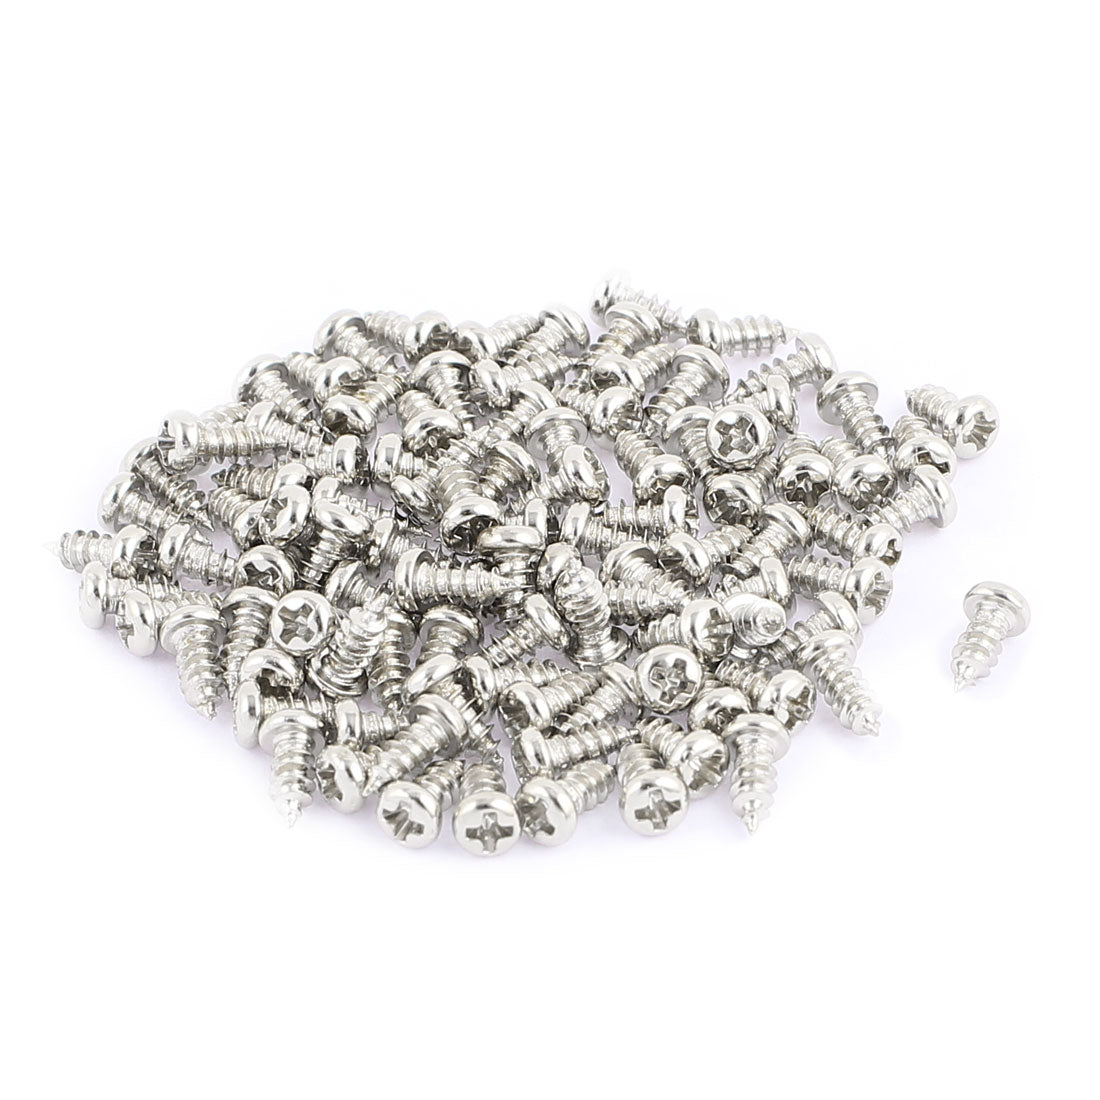 uxcell Uxcell 100pcs M2.5 x 6mm Stainless Steel Phillips Pan Round Head Self Tapping Screws